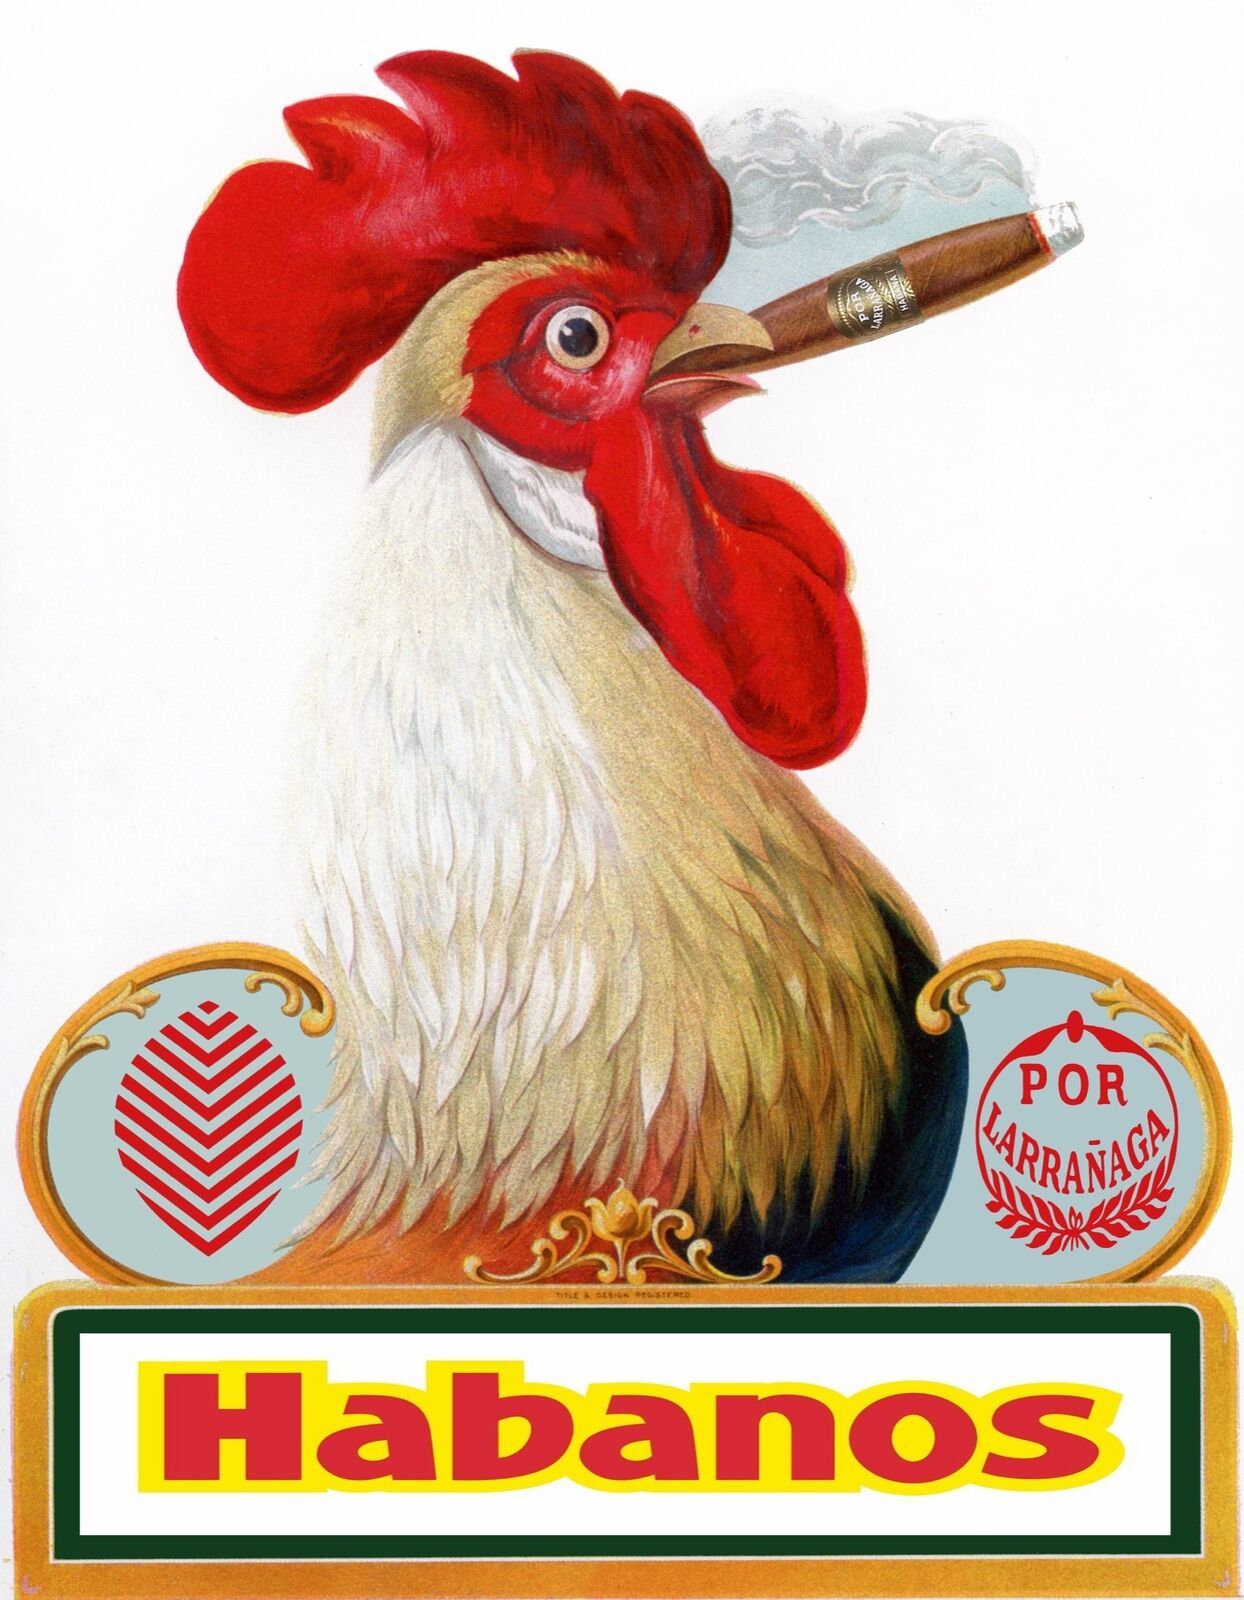 8428.Decoration Poster.Home Room wall art design.Habanos Rooster smoking cigar